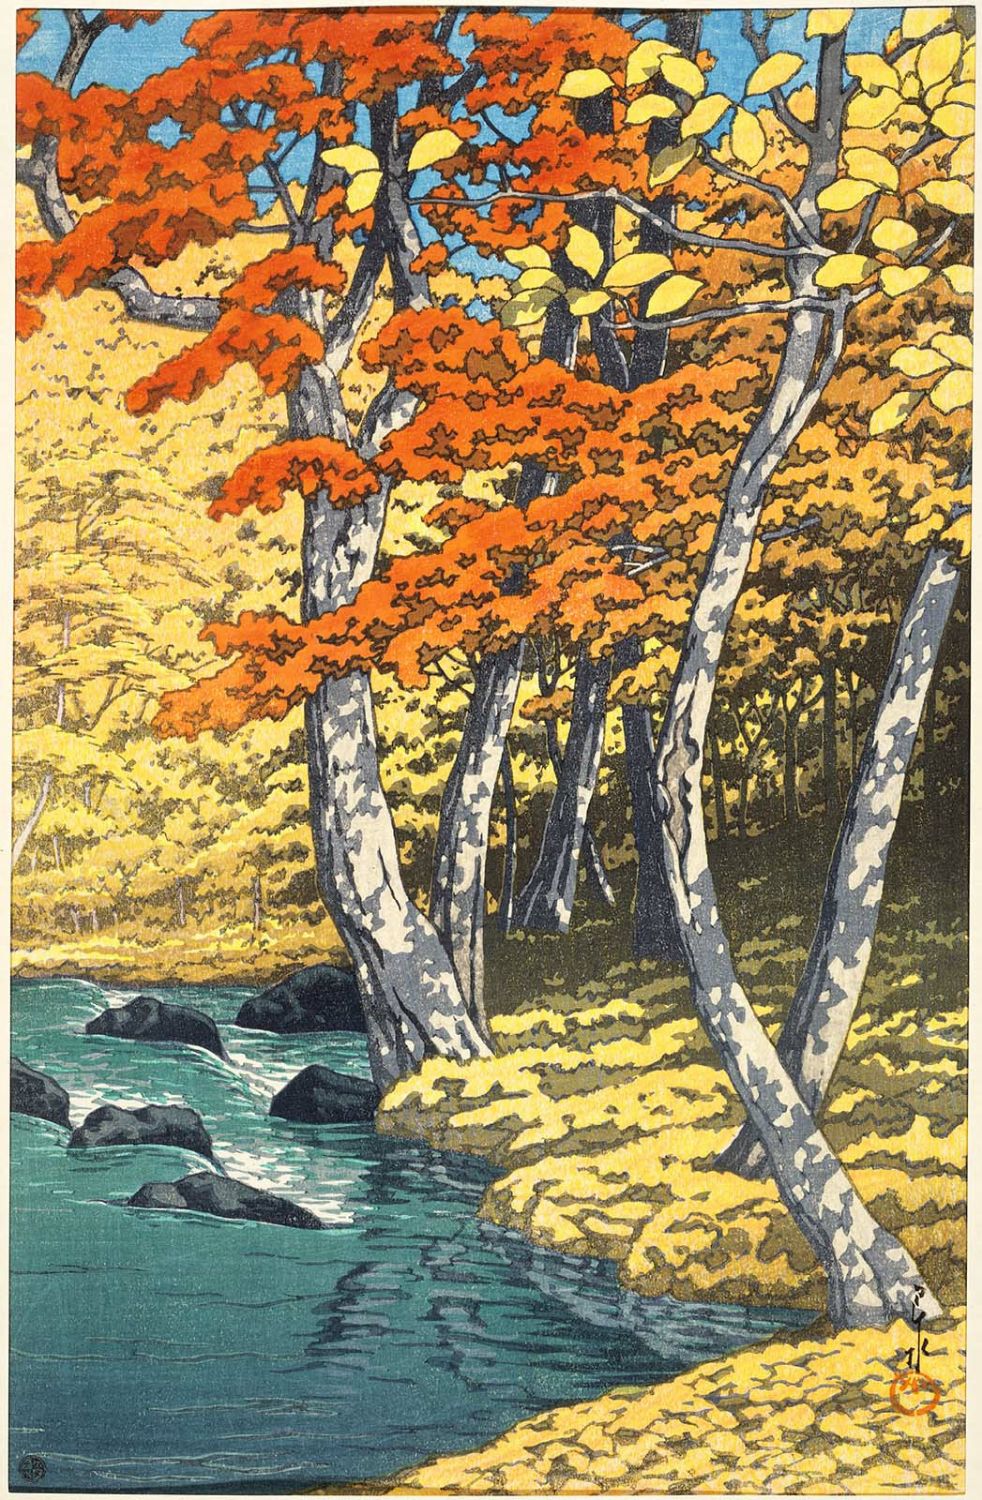 Herfst in Oirase by Hasui Kawase - 1933 - 36.51 × 24.13 cm 